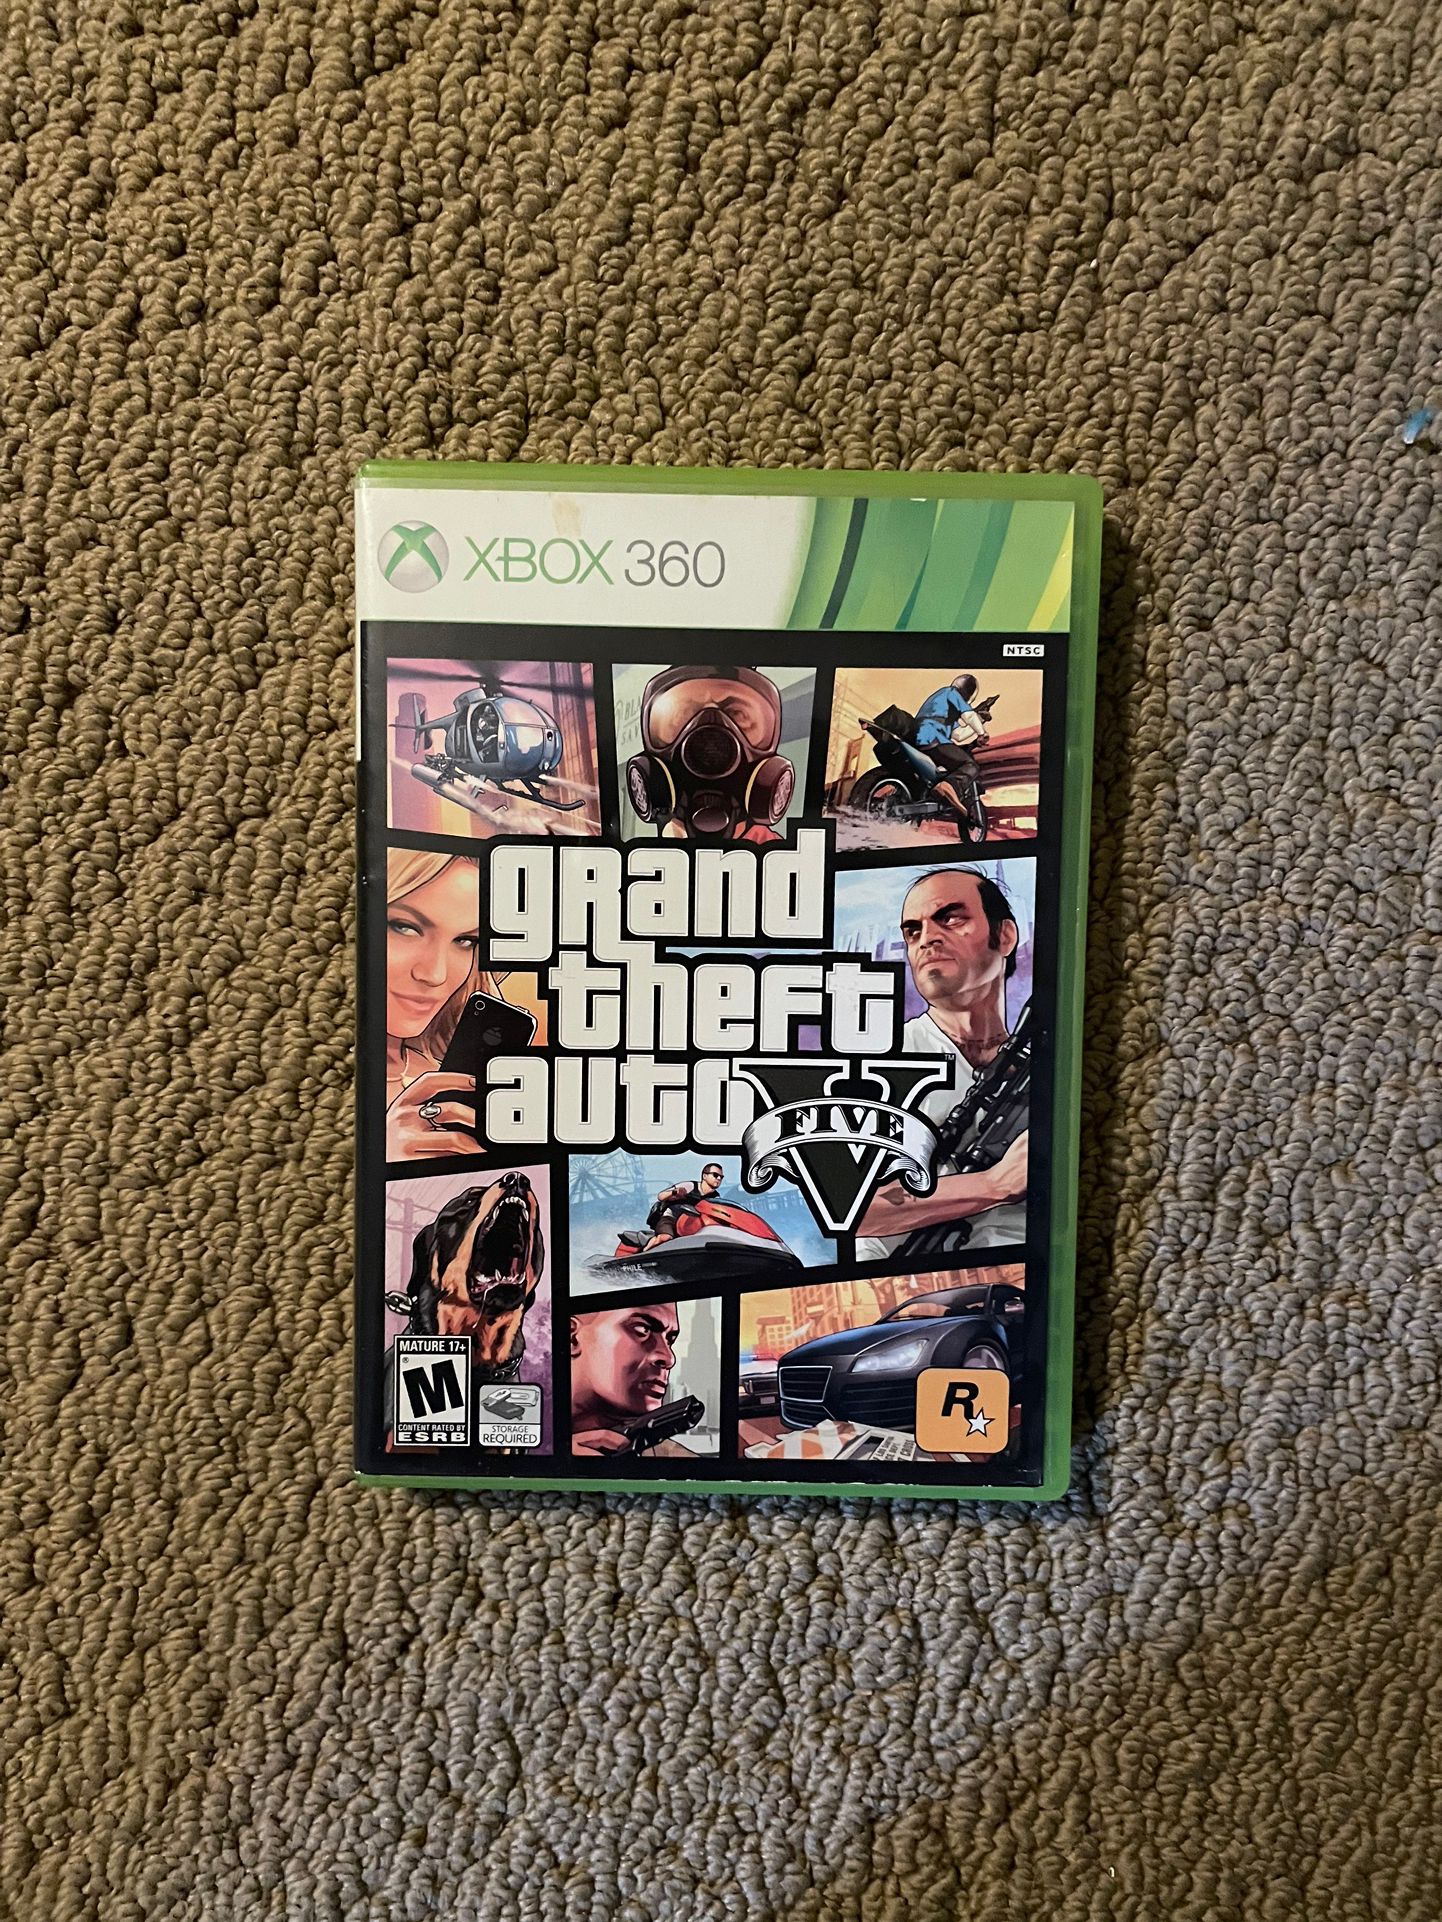 Grand Theft Auto V for Xbox 360 (COMPLETE W/ MANUAL)